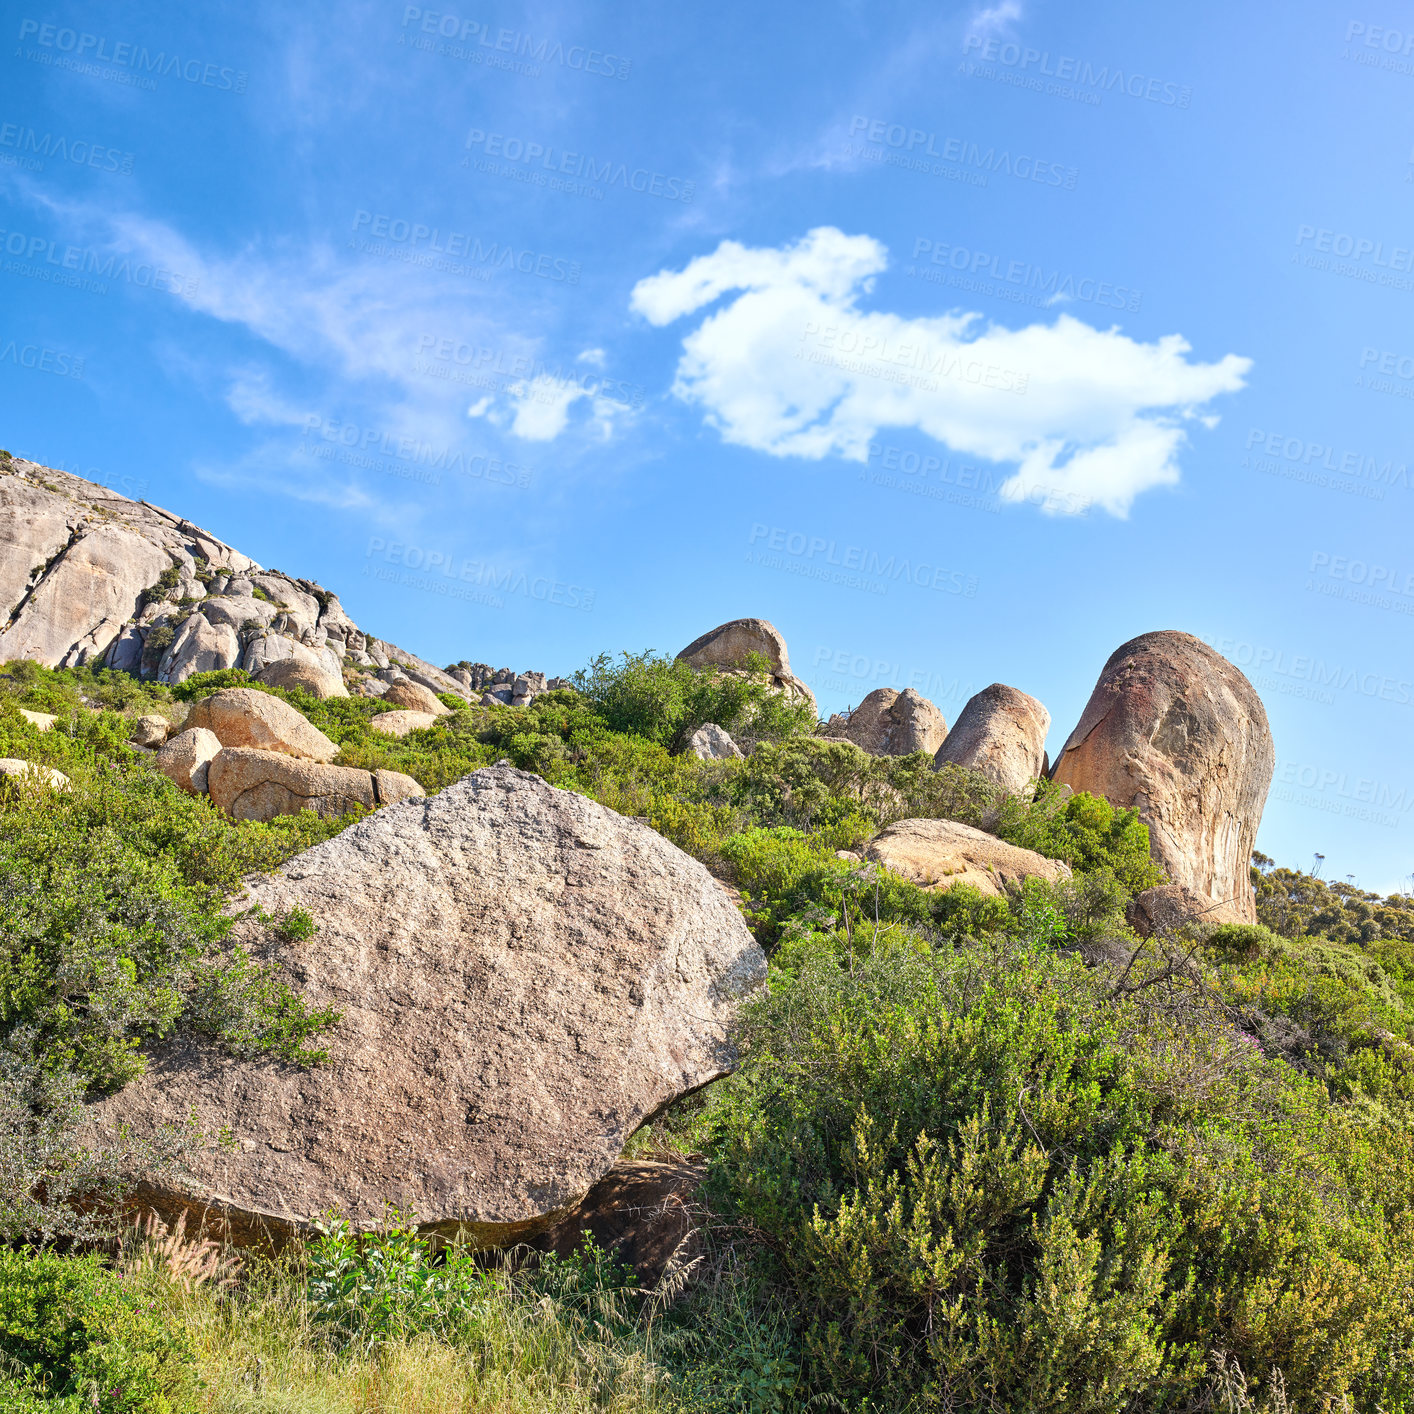 Buy stock photo Many rocks in between bushes on a blue cloud sky with copy space. Wild nature landscape of large stones with plants, grass, and uncultivated shrubs growing on rolling hills in an eco environment